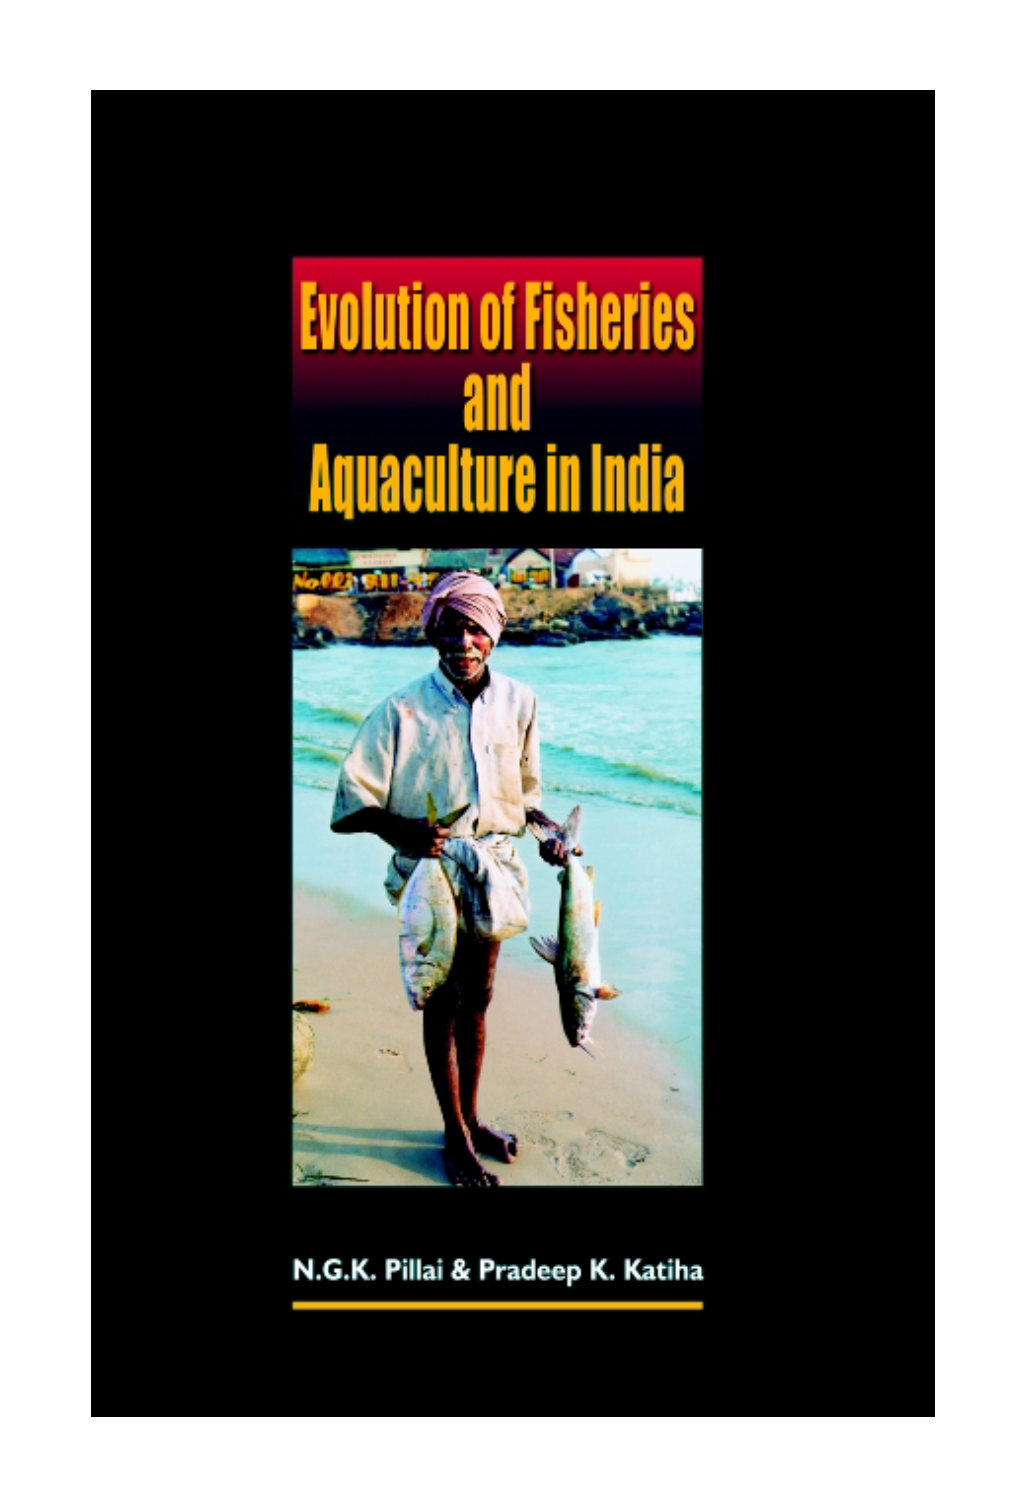 Evolution of Fisheries and Aquaculture in India